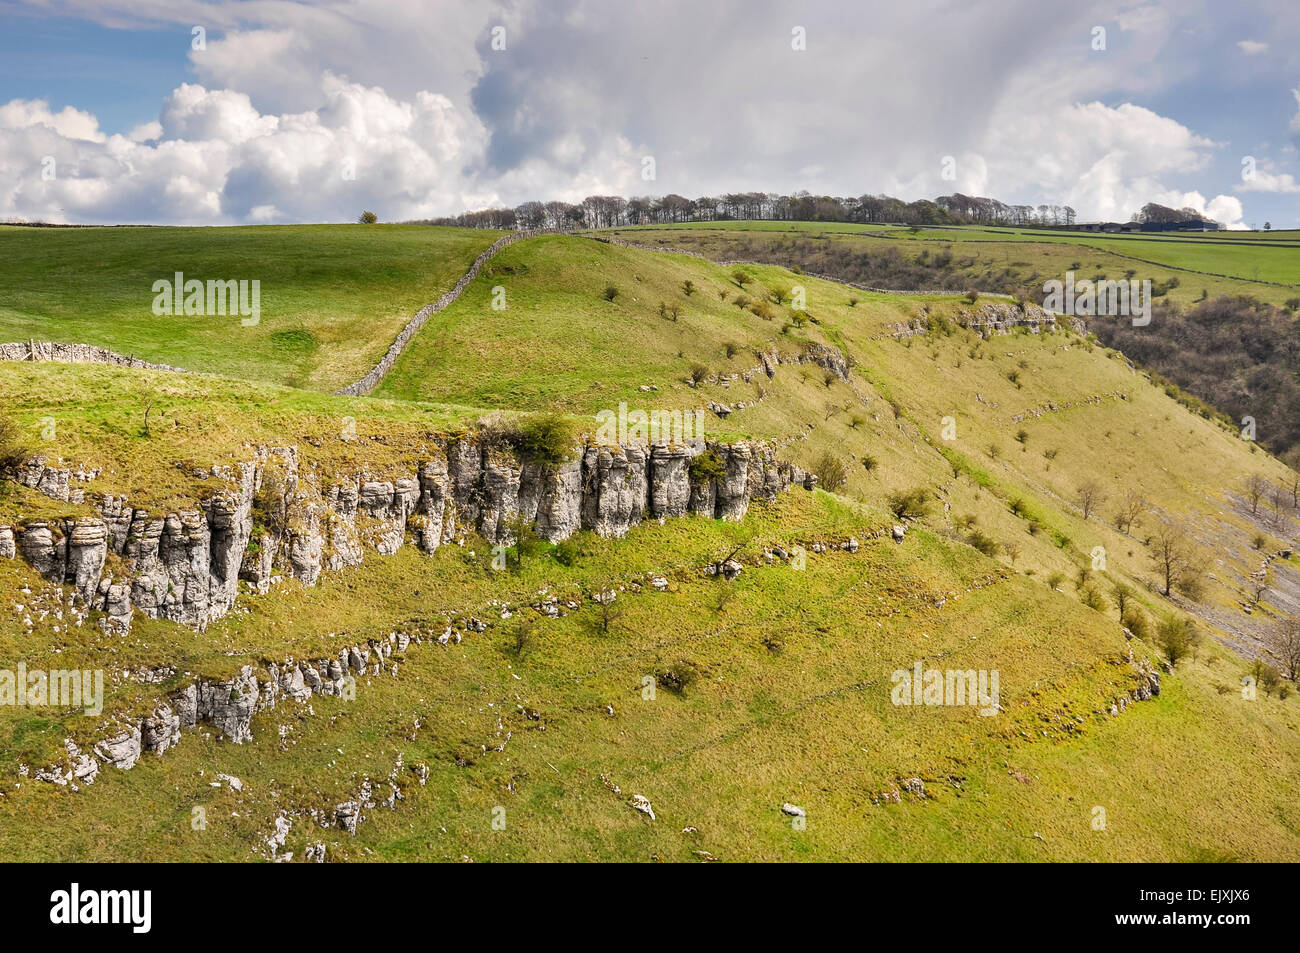 Layers of limestone on hillside in Lathkill Dale near Monyash in the Peak District, Derbyshire. A sunny spring day. Stock Photo